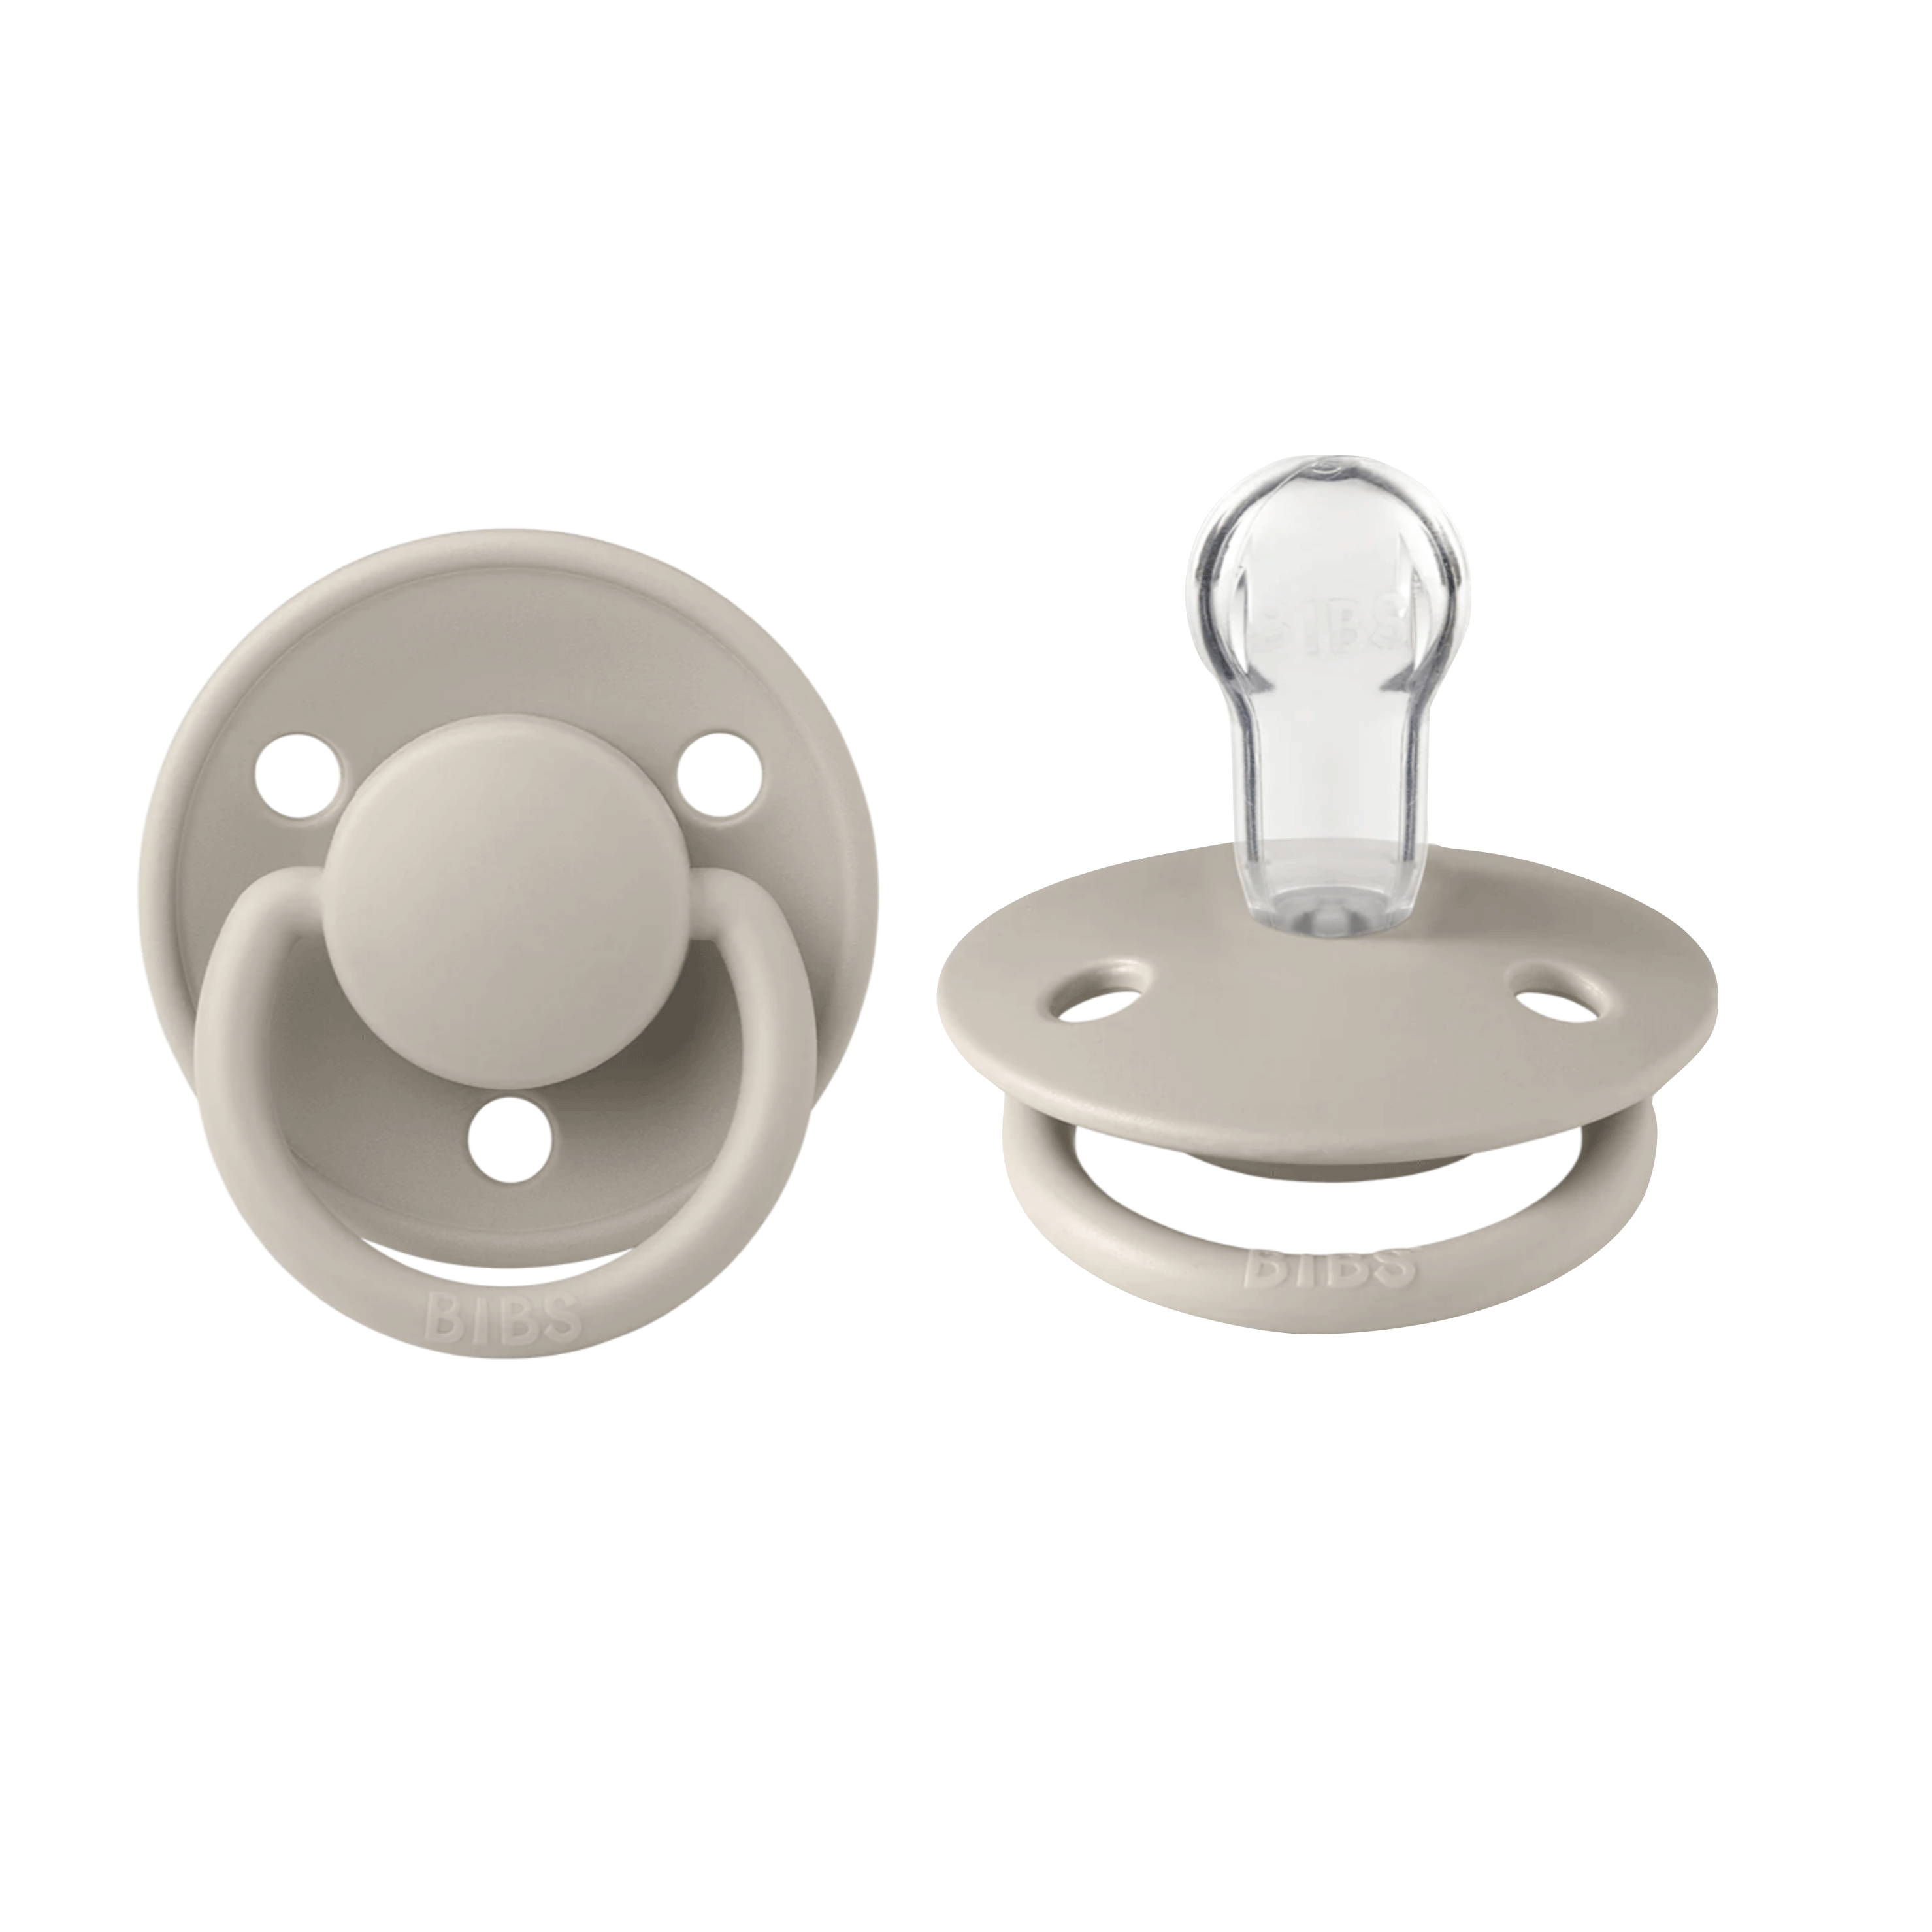 Bibs Pacifiers set of 2 in sand colour